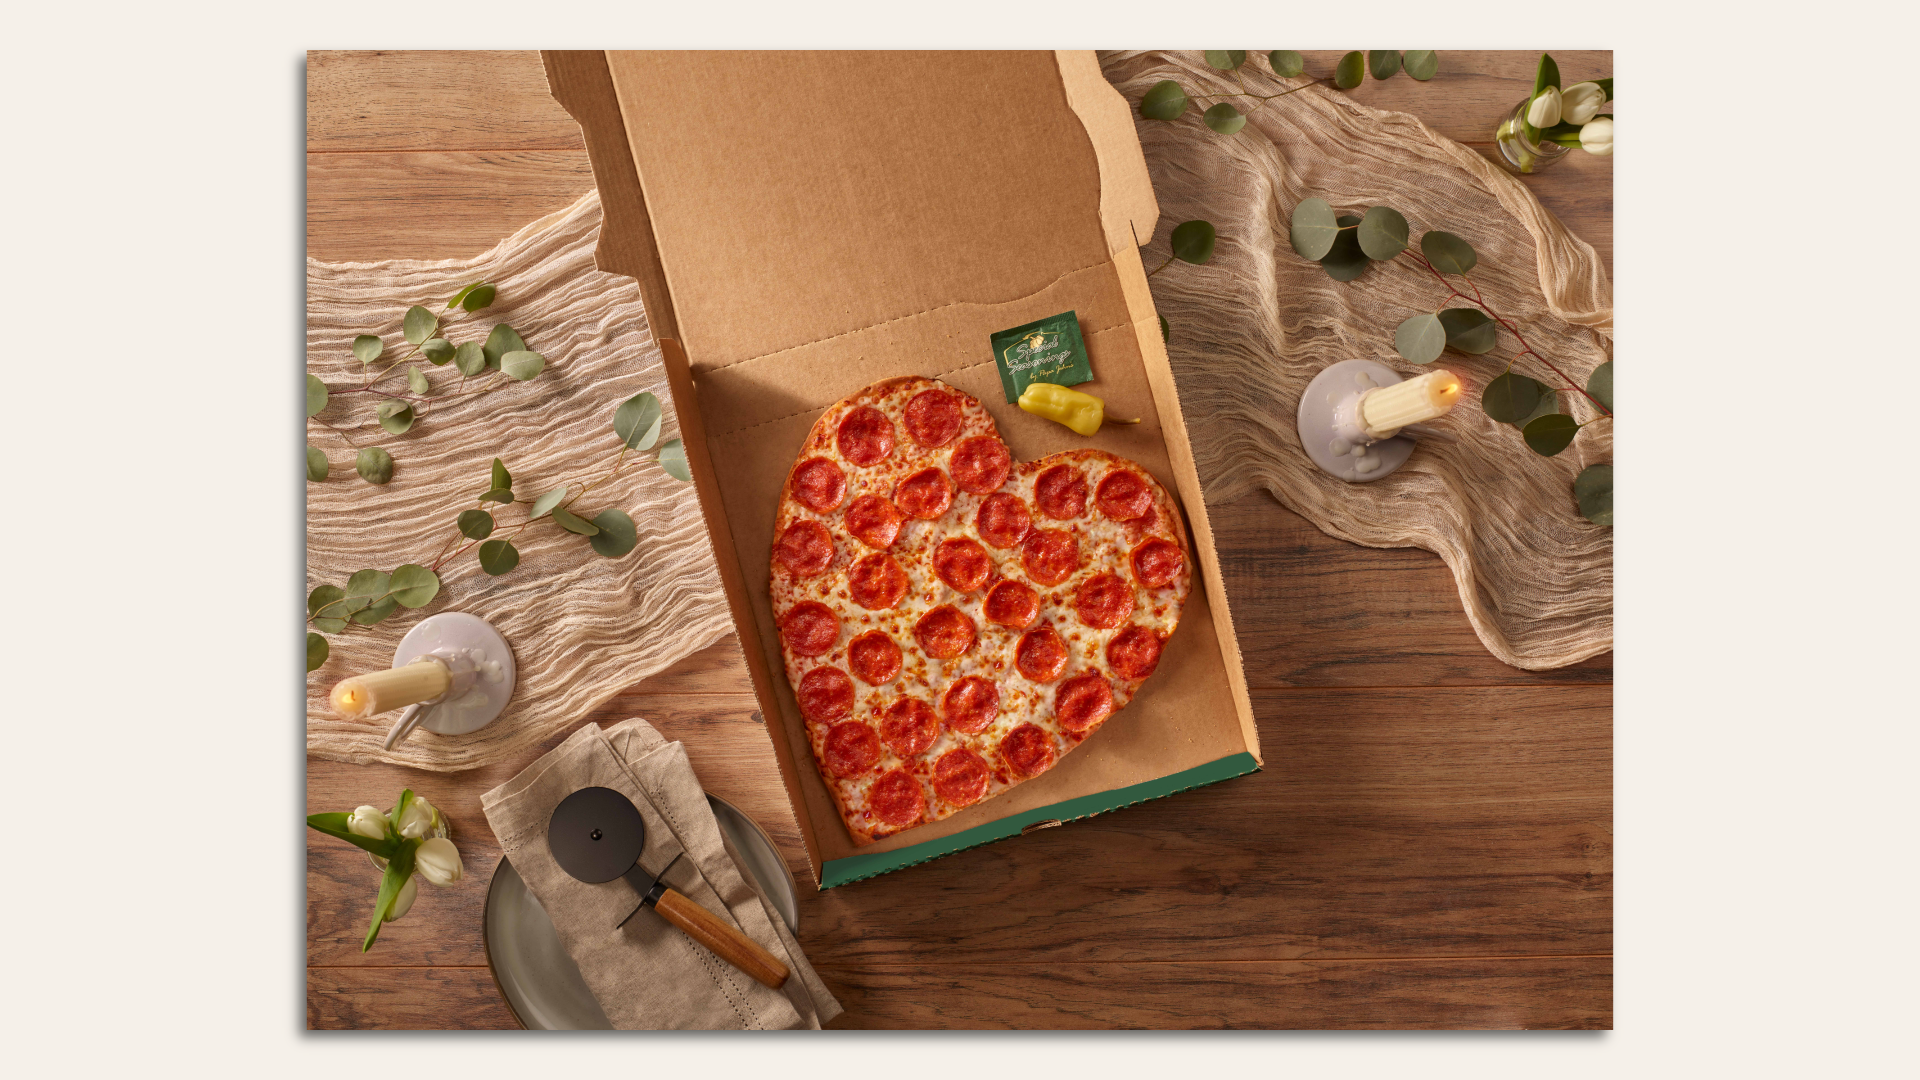 A heart-shaped pizza in a pizza box surrounded by the trappings of a candlelight dinner.